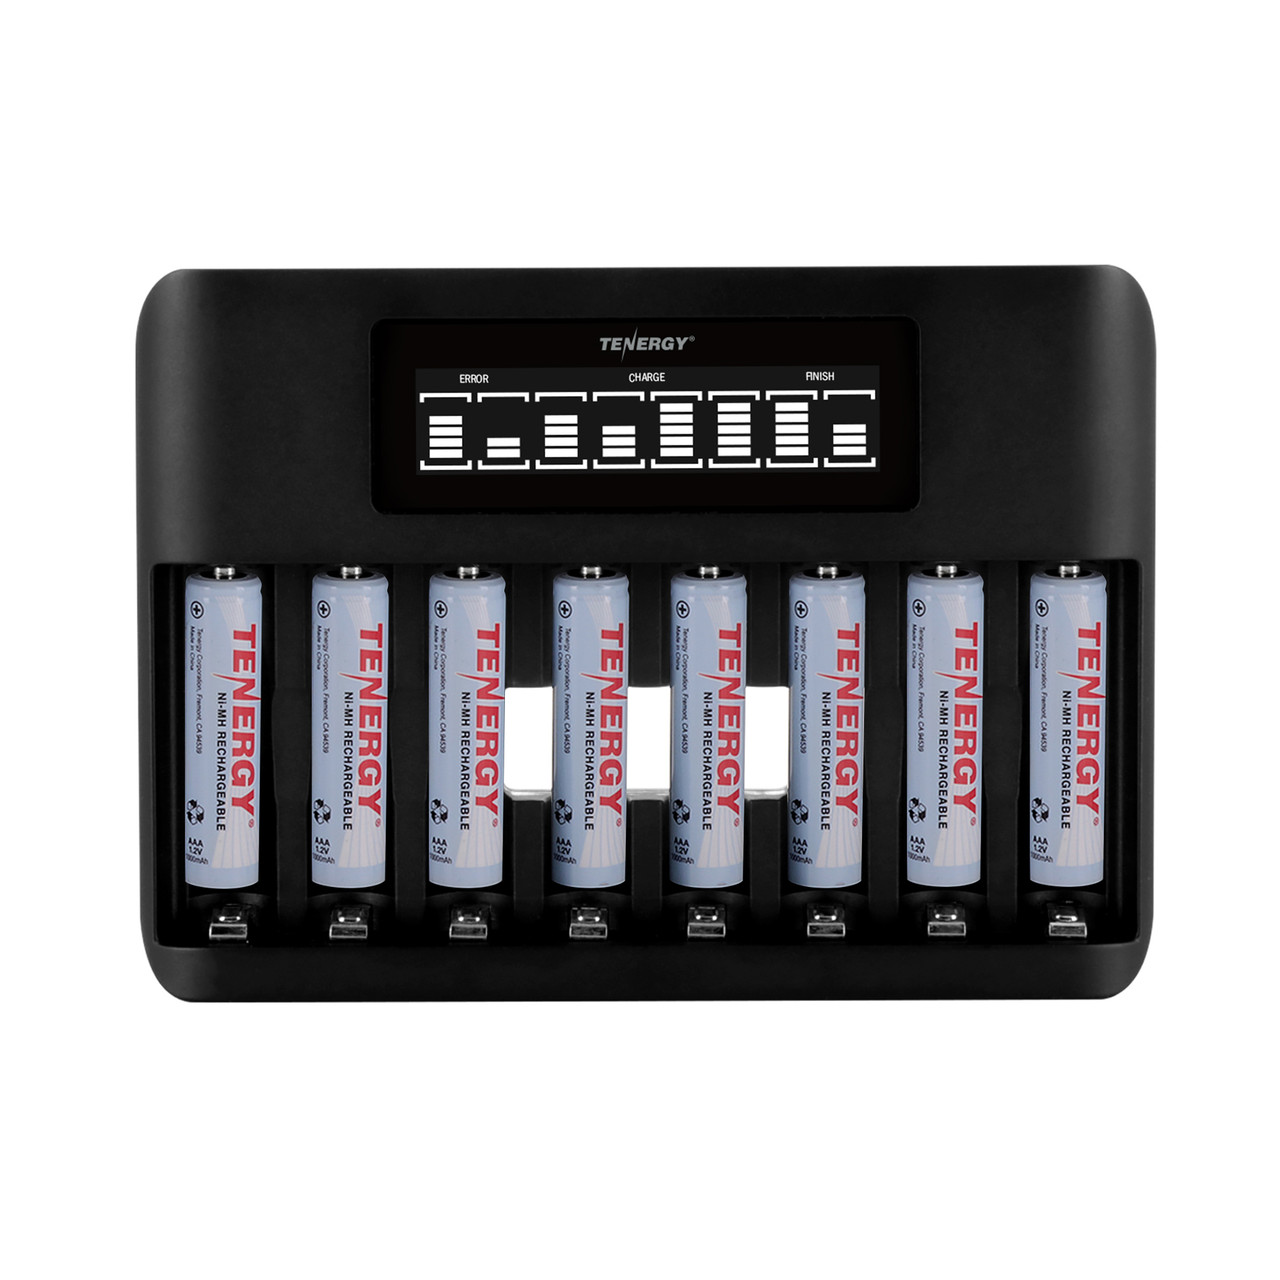 Combo: Tenergy TN480U 8-Bay NiMH Battery LCD Display Fast Charger + 8pcs 1000mah AAA Rechargeable Batteries